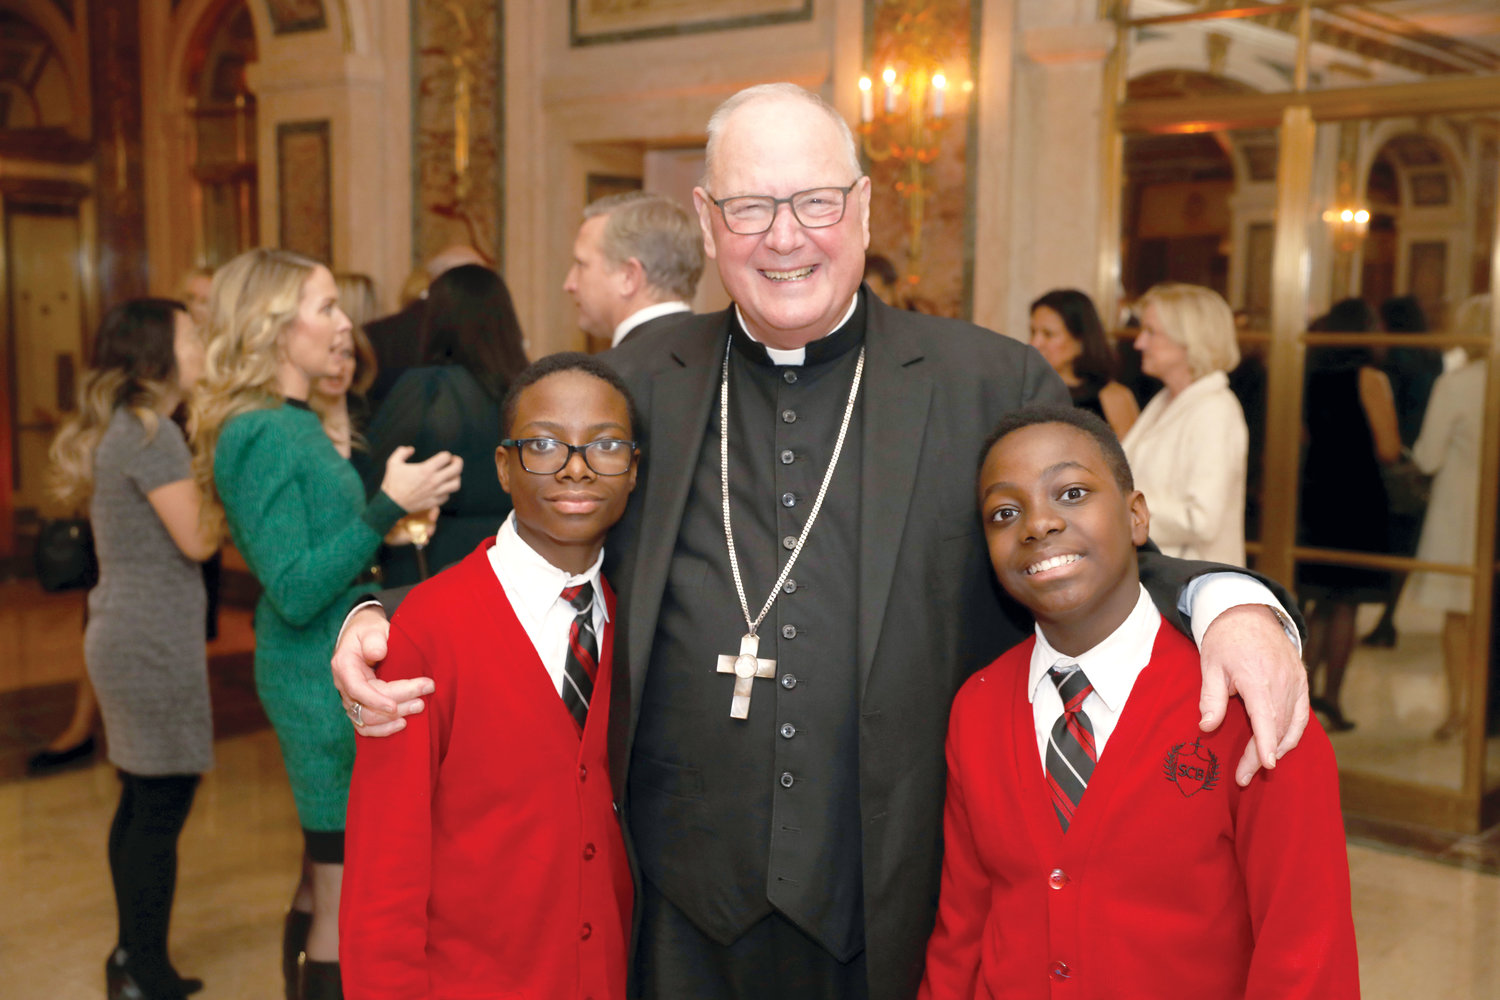 Prince Pierre, left, and Schneider Pierre greet Cardinal Dolan at the 43rd annual Inner-City Scholarship Fund Awards Dinner at the Plaza Hotel in Manhattan last December. The Pierre brothers, who are Inner-City Scholarship Fund recipients, attend St. Charles Borromeo School in Harlem.